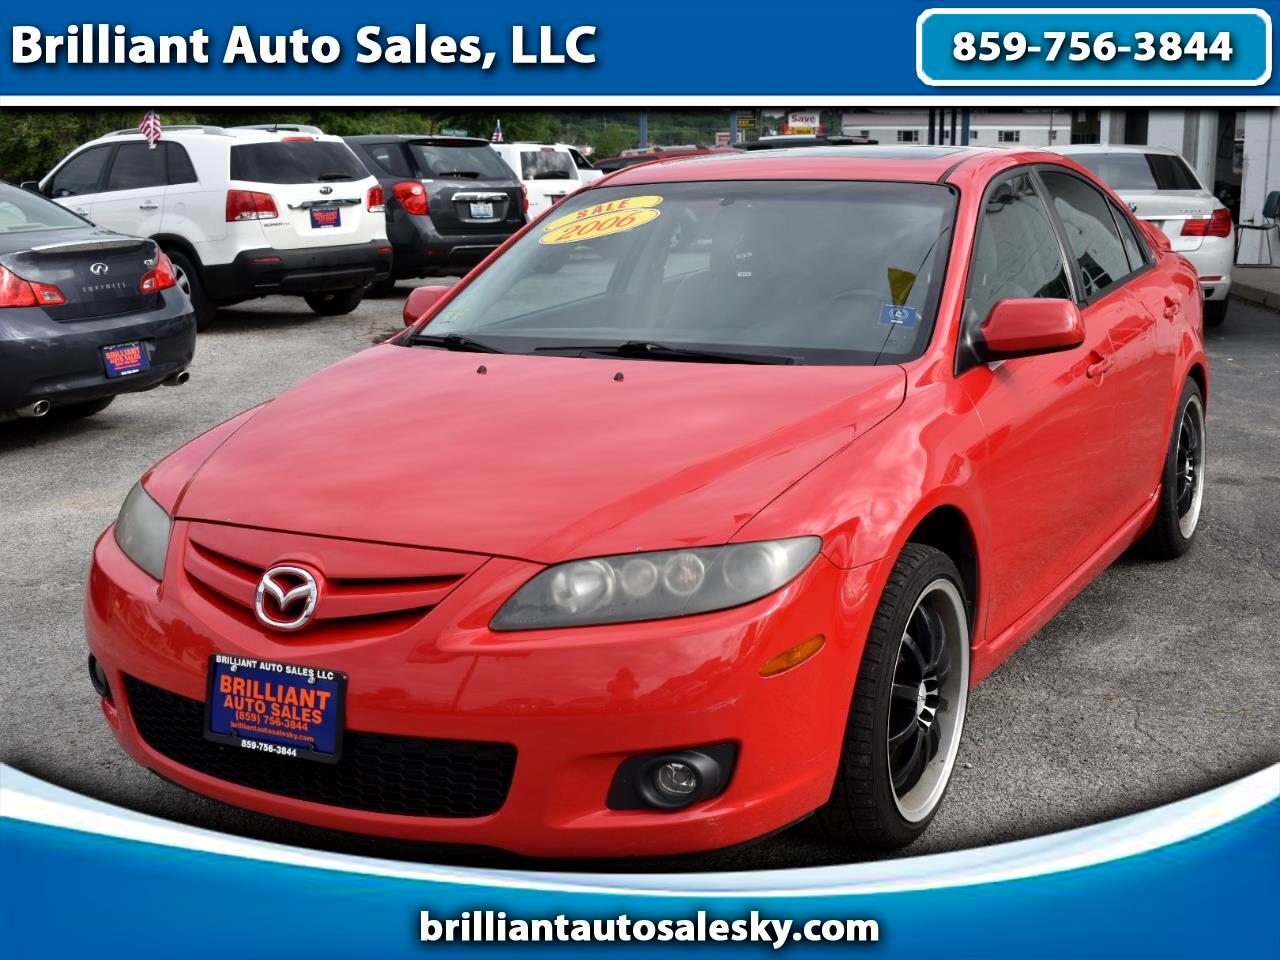 Used Cars For Sale Berea Ky 40403 Brilliant Auto Sales Llc